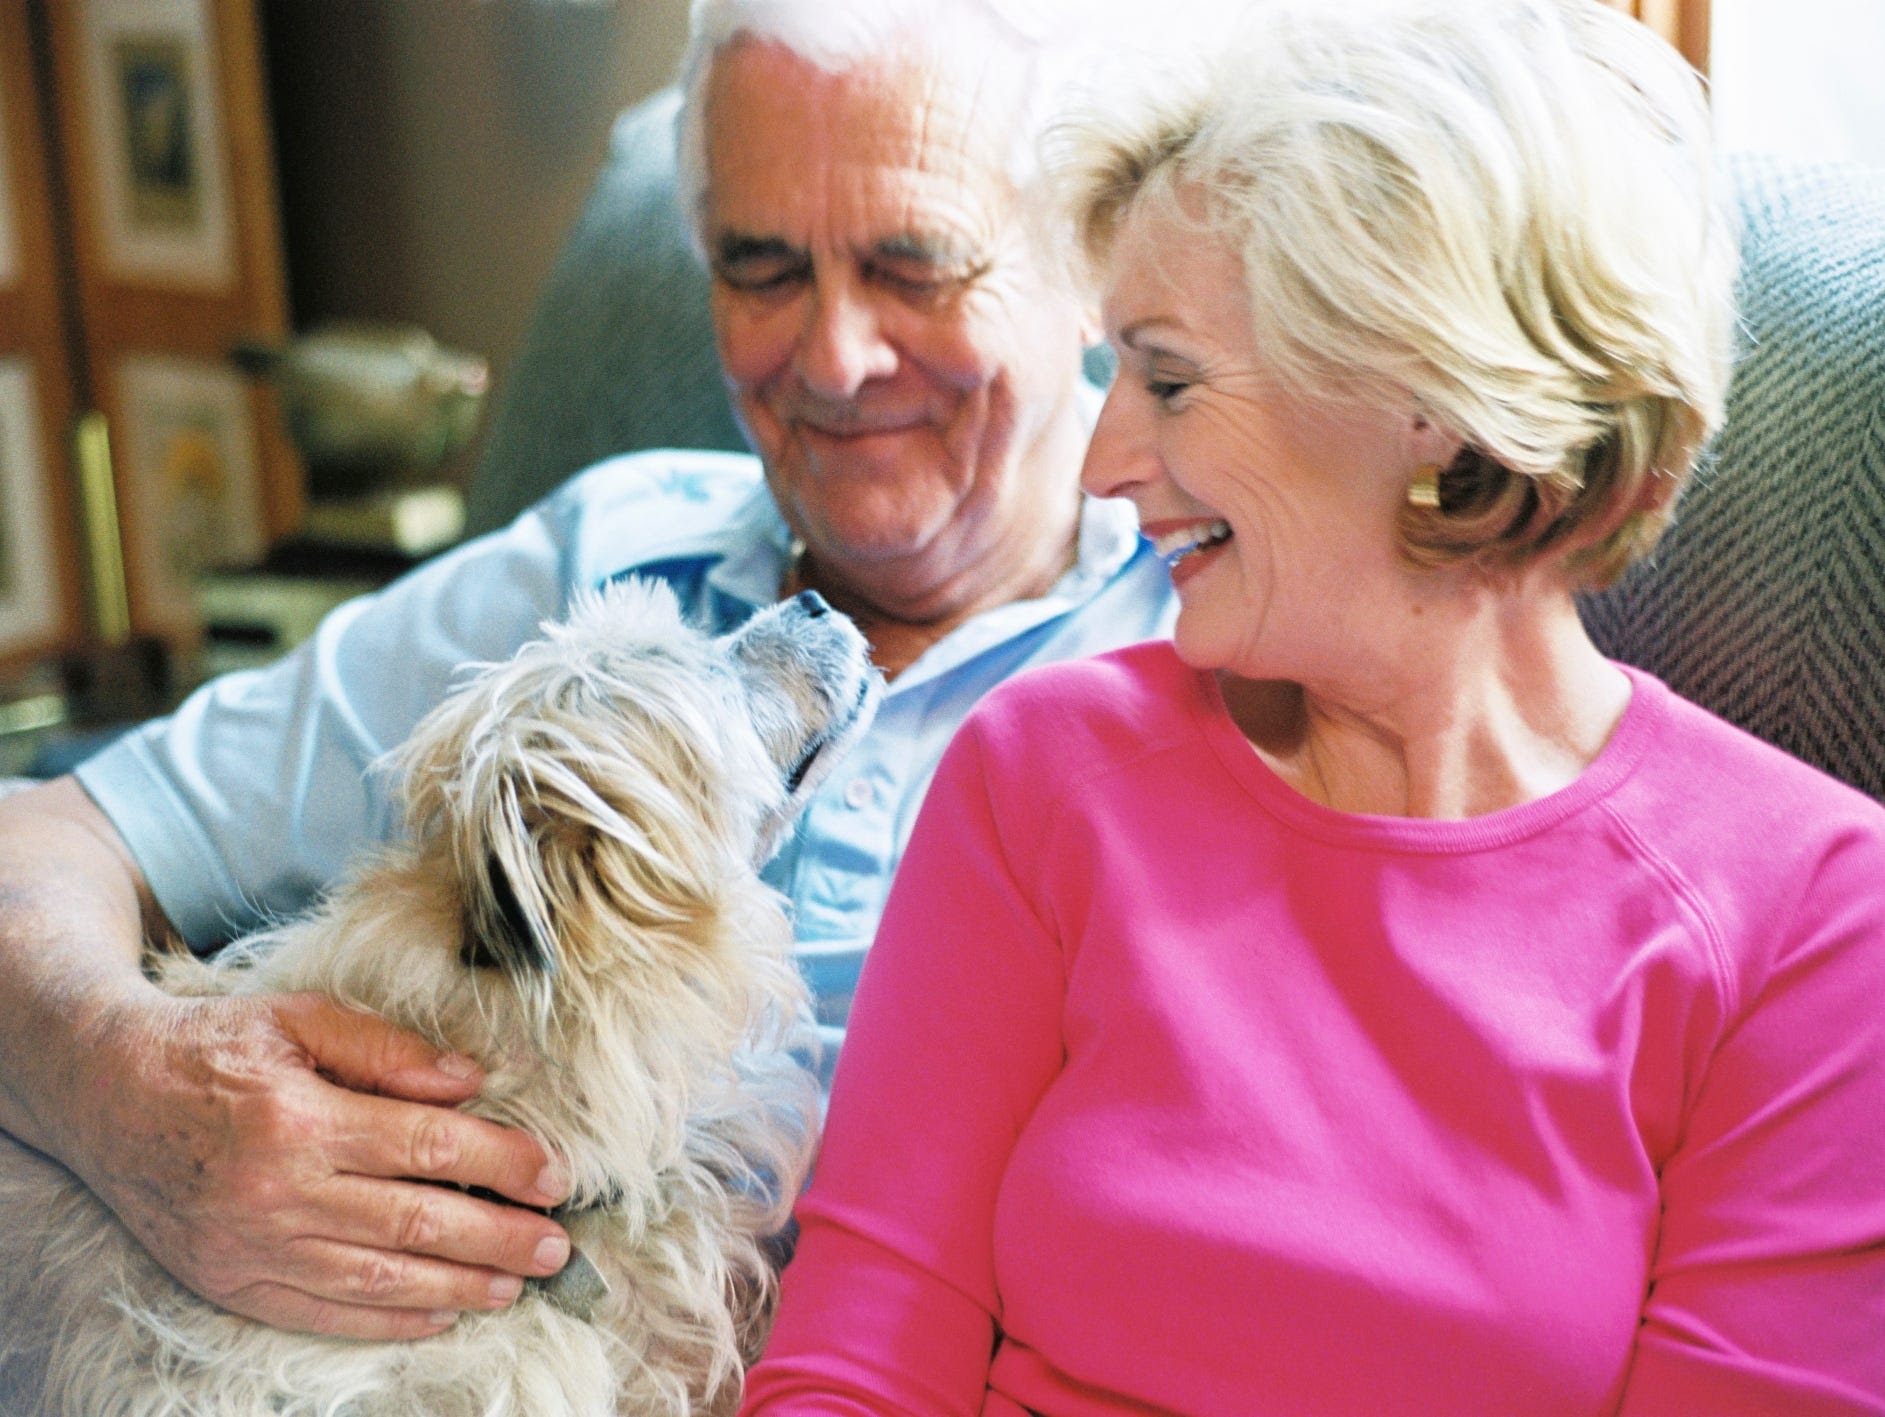 Most retirees are in the best home of their lives.